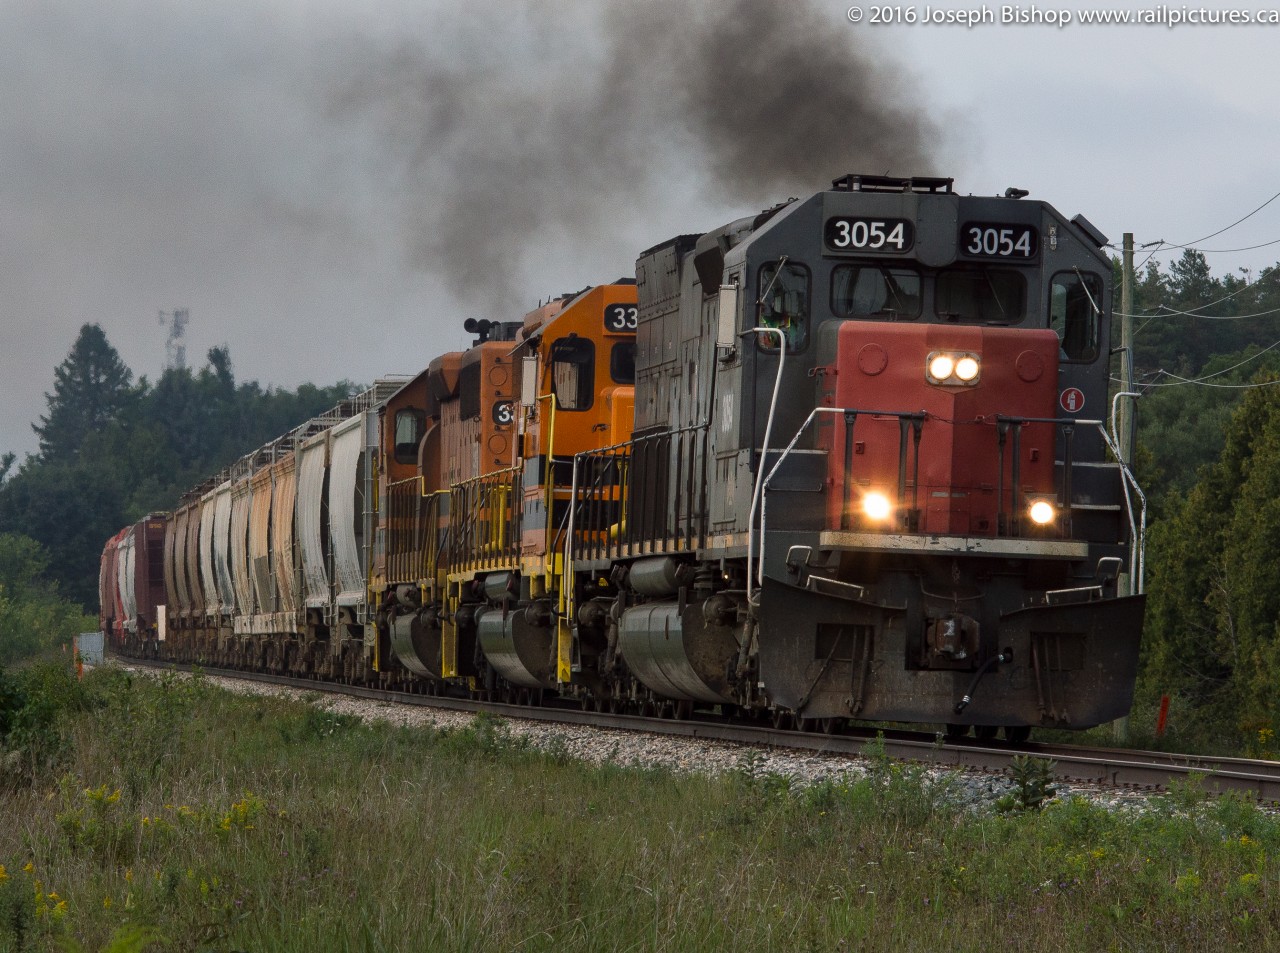 GEXR 3054 leads train 432 out of Guelph.  The sun didn't want to cooperate but the crew really poured on the smoke as they passed.  Thanks to Rob Smith for the inspiration for the photo location.